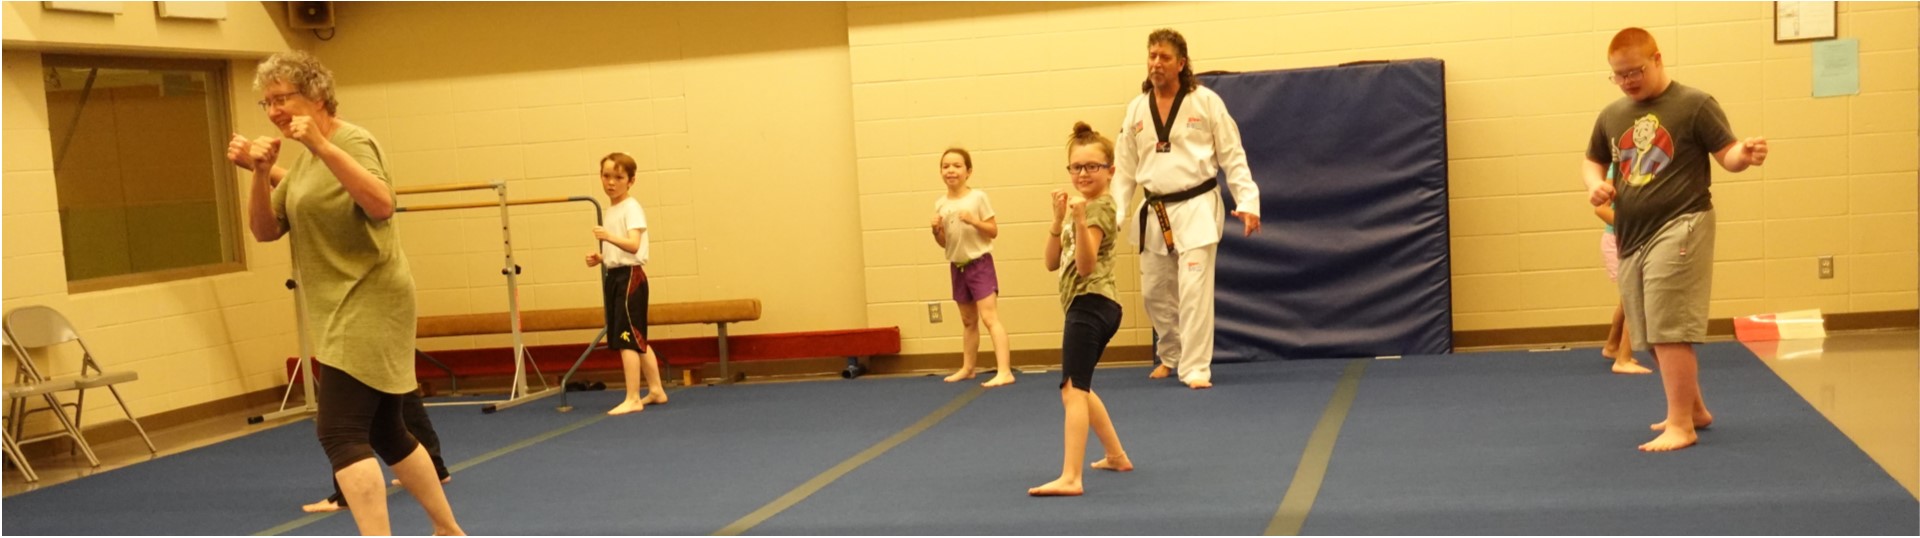 Introductory Tae Kwon Do Class